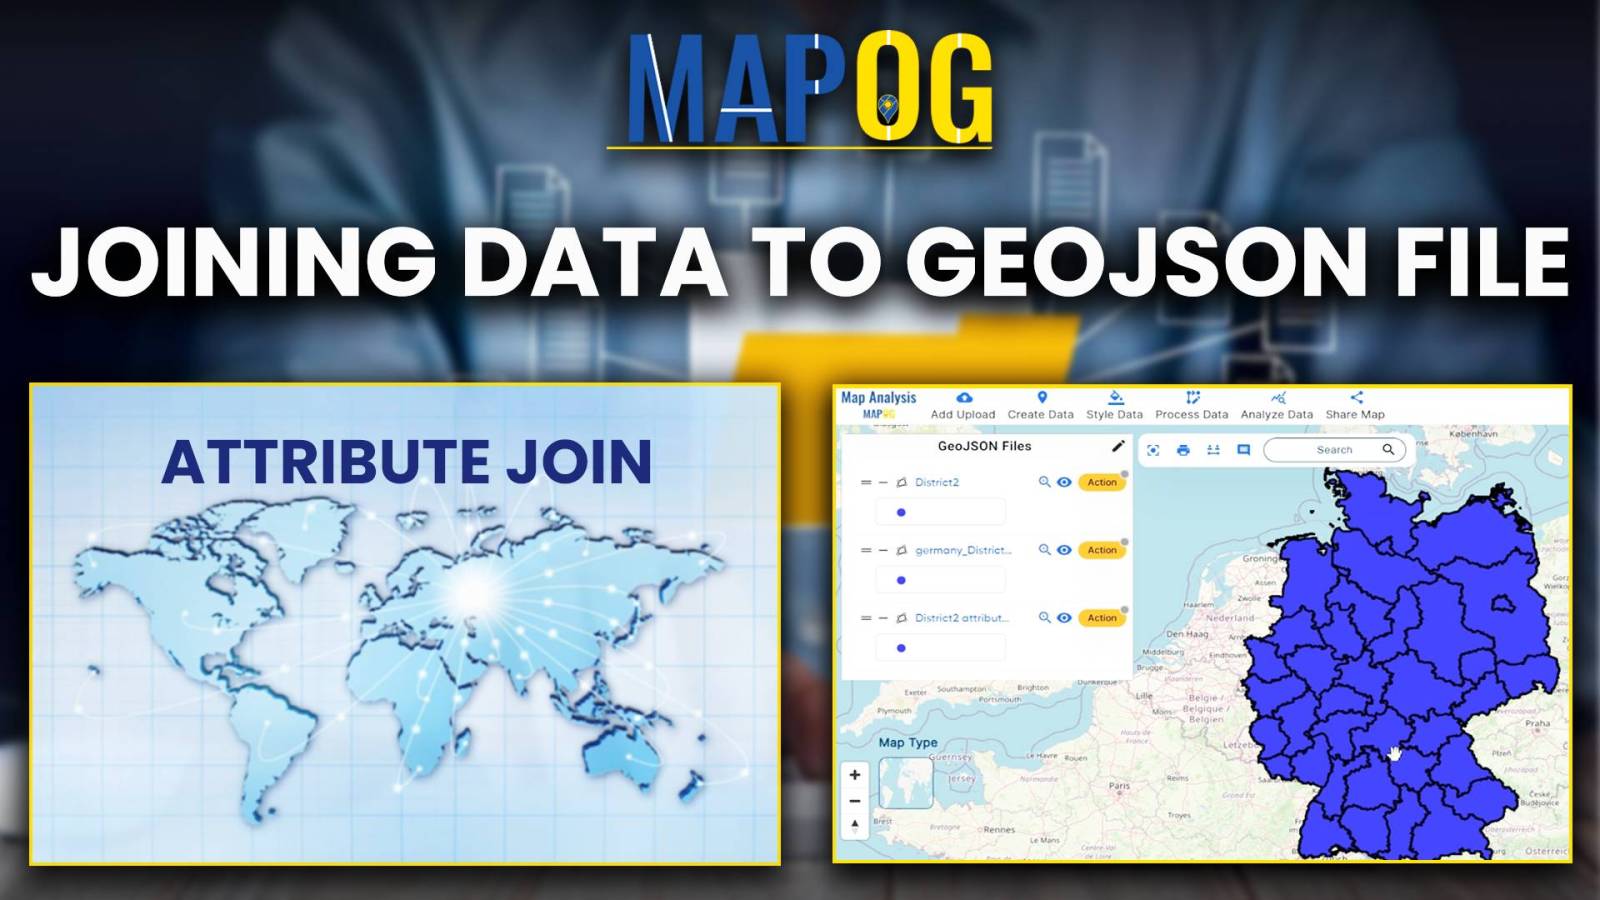 Joining data to GeoJSON File